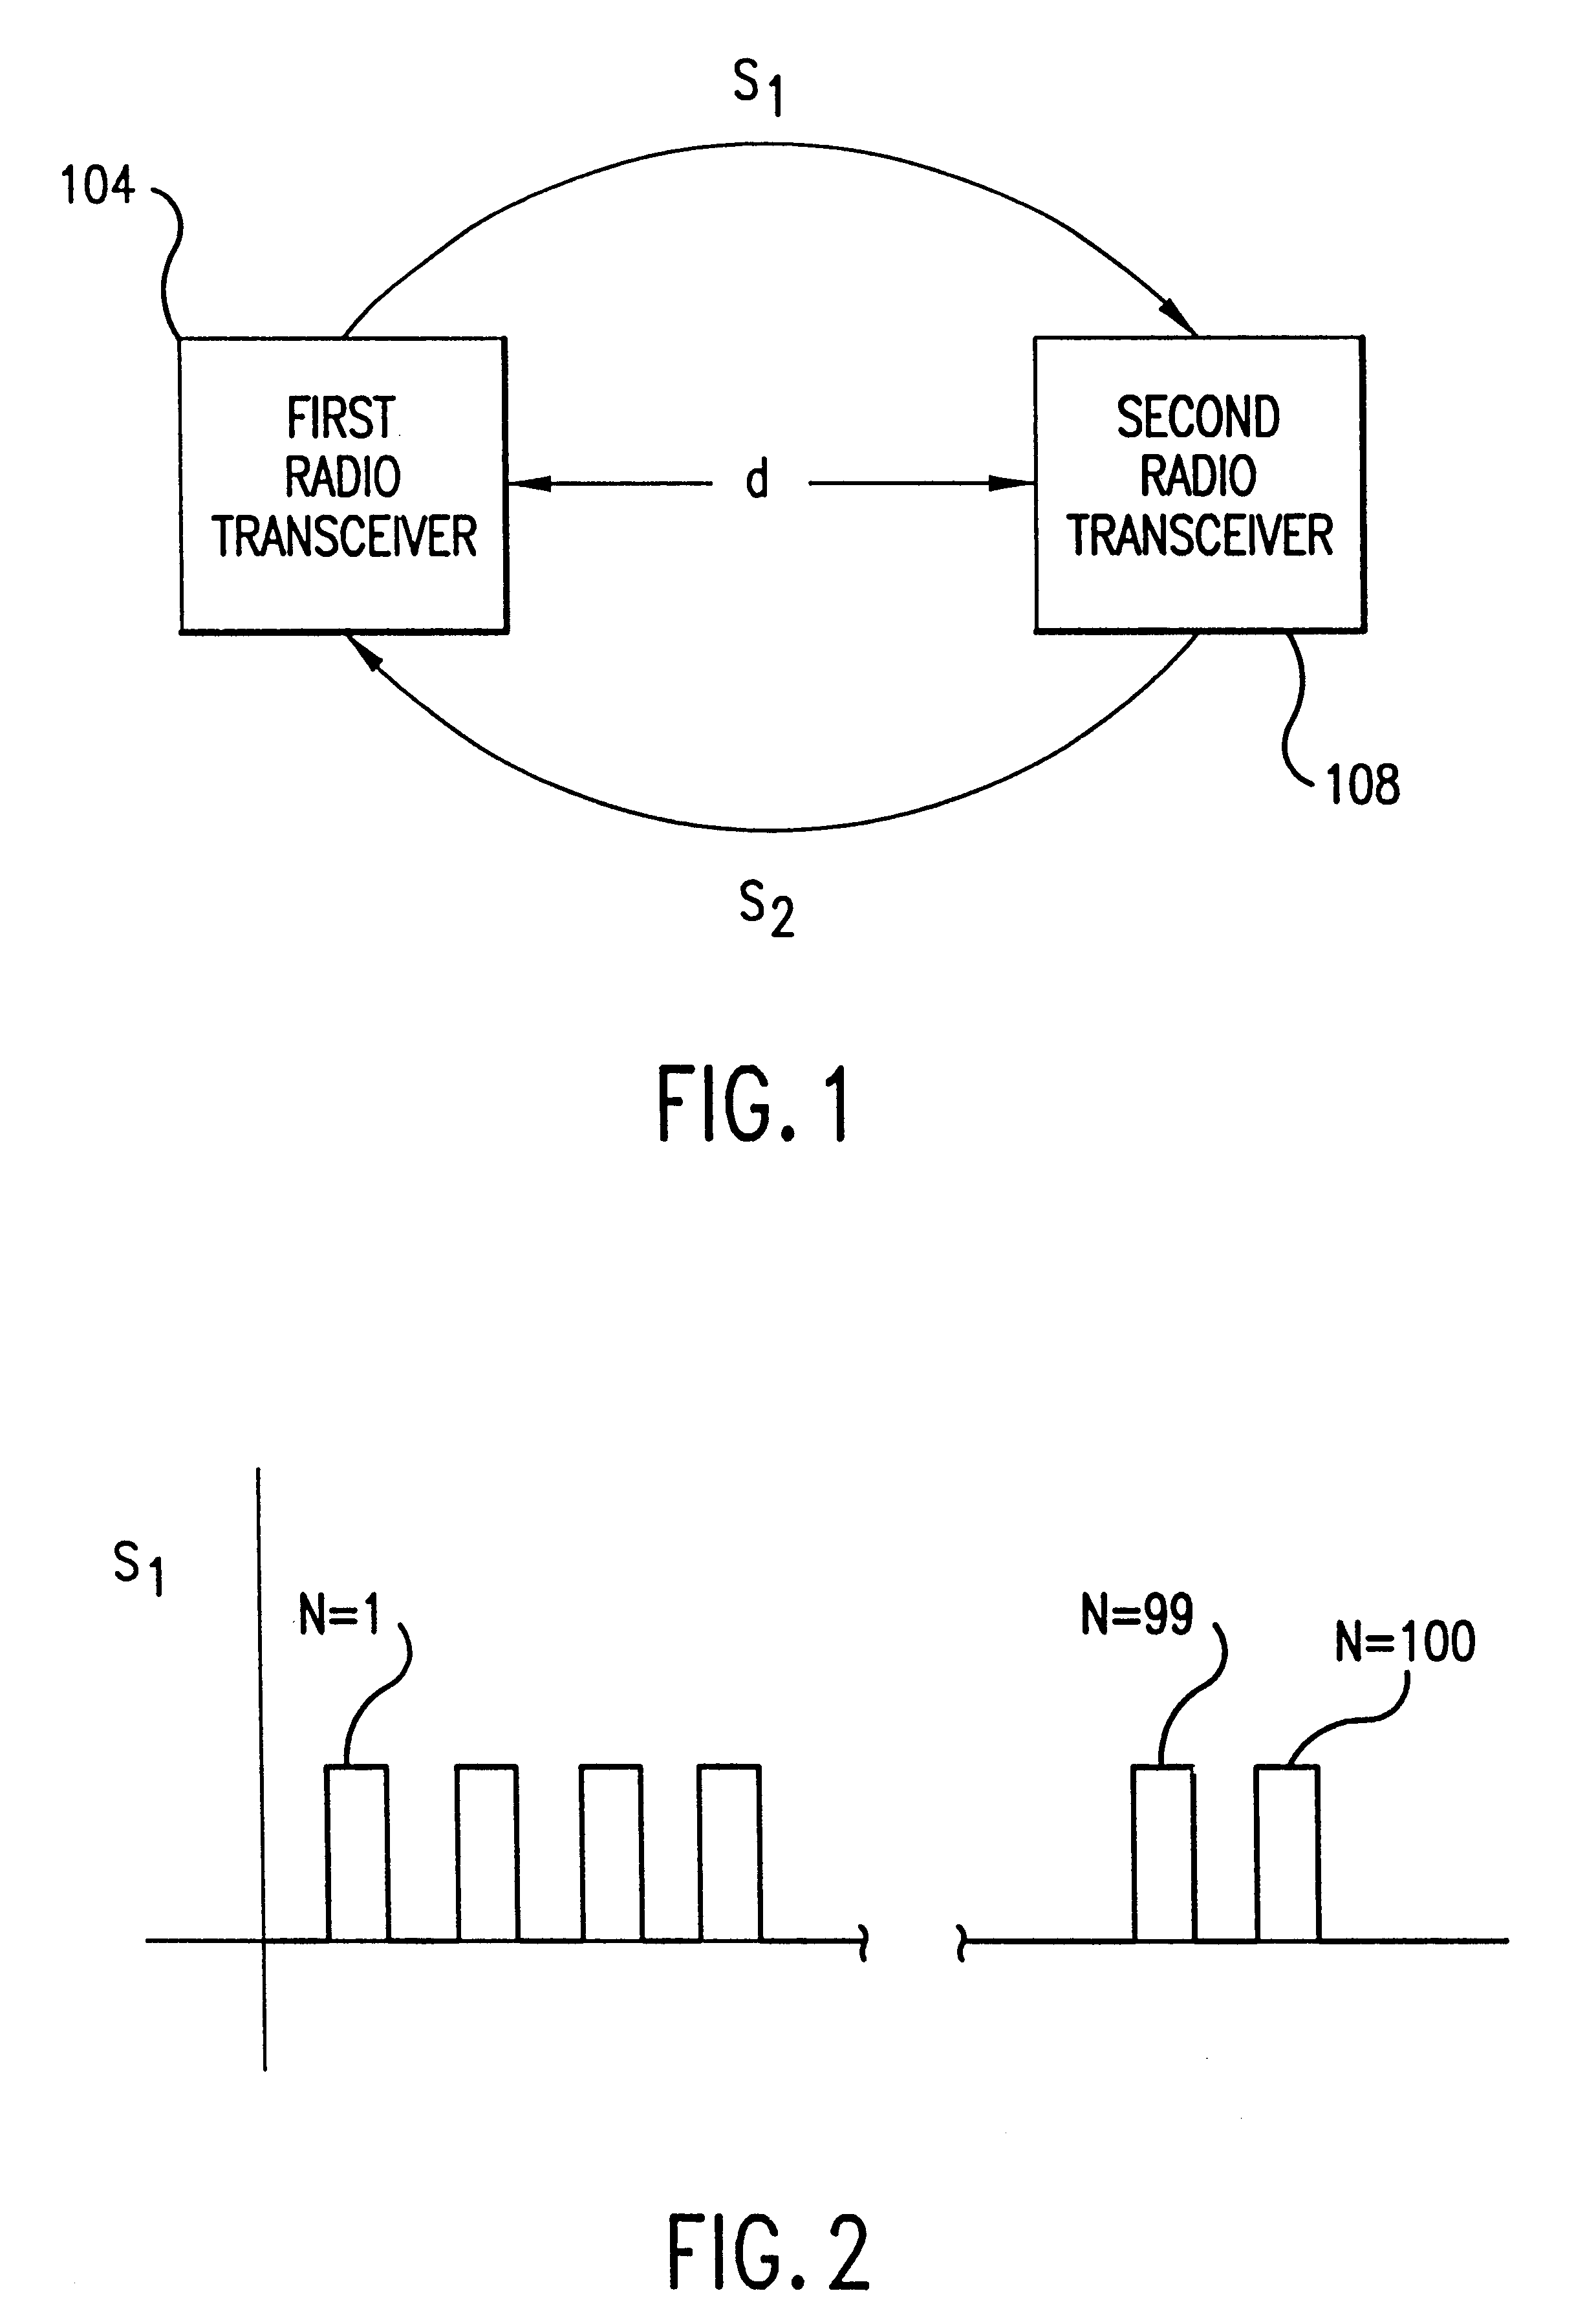 System and method for distance measurement by inphase and quadrature signals in a radio system